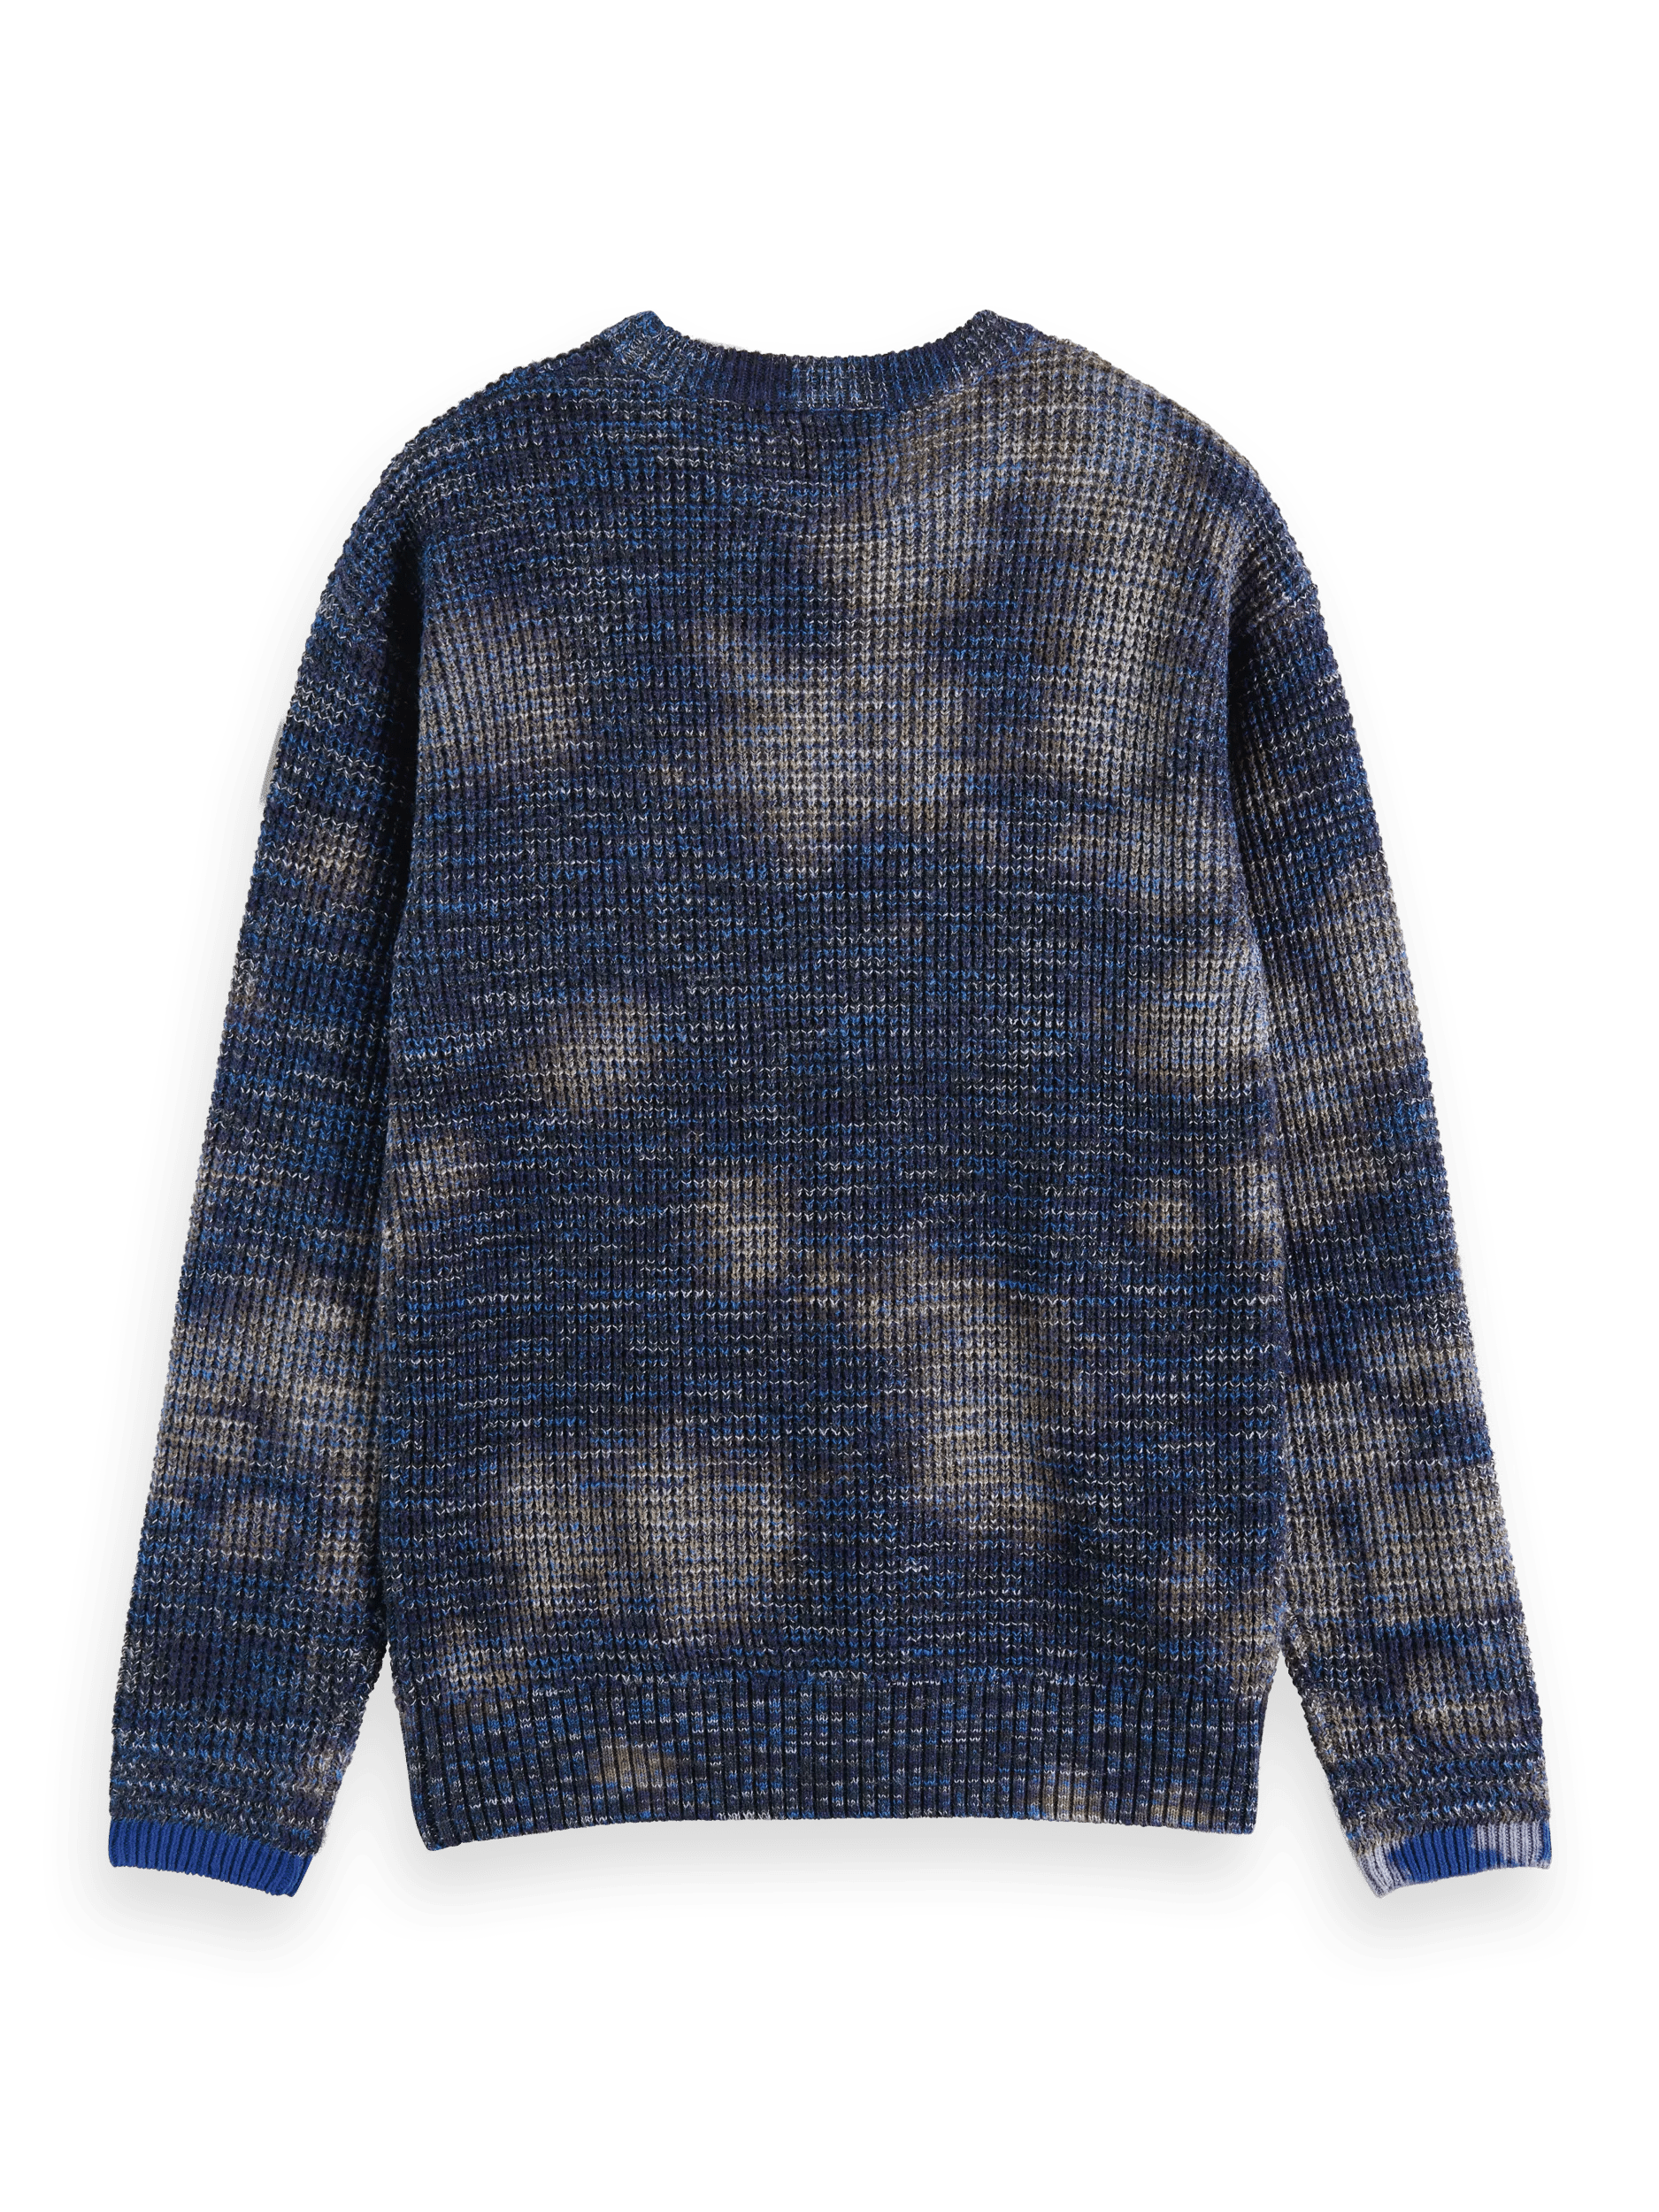 Scotch & Soda Waffle-knitted pullover sweater BCK